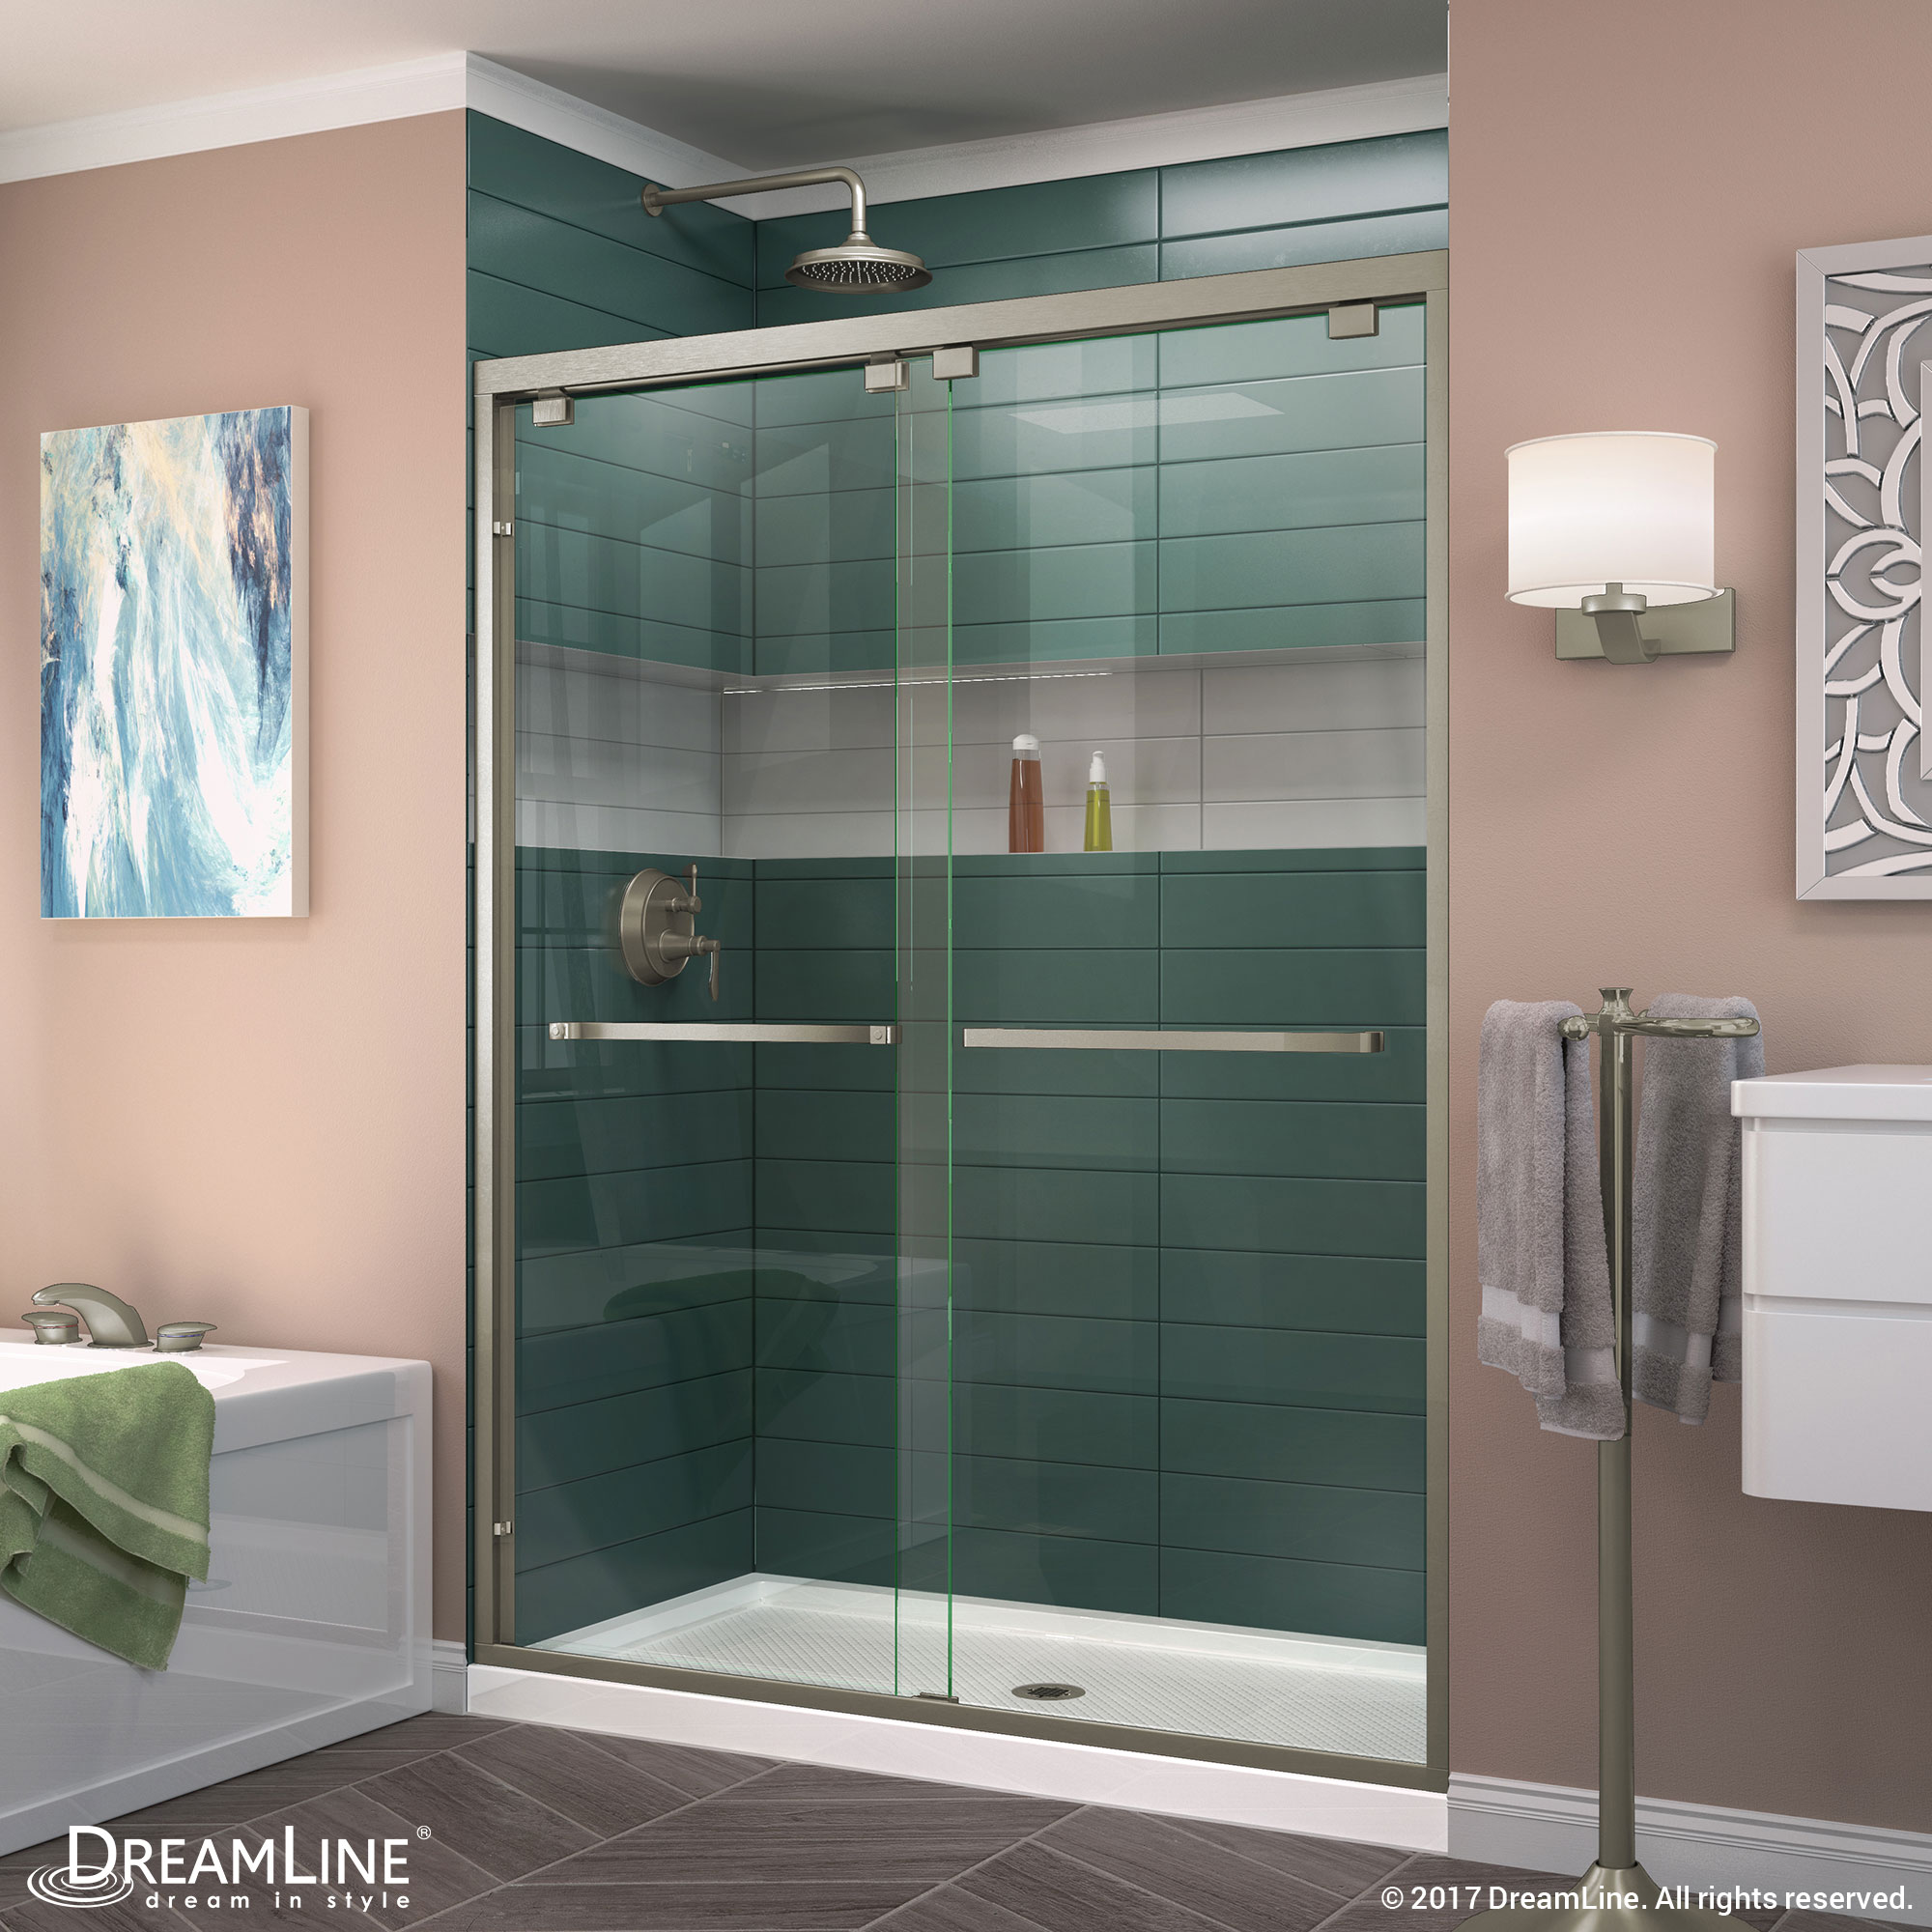 DreamLine Encore 30 in. D x 60 in. W x 78 3/4 in. H Bypass Shower Door in Chrome and Center Drain White Base Kit